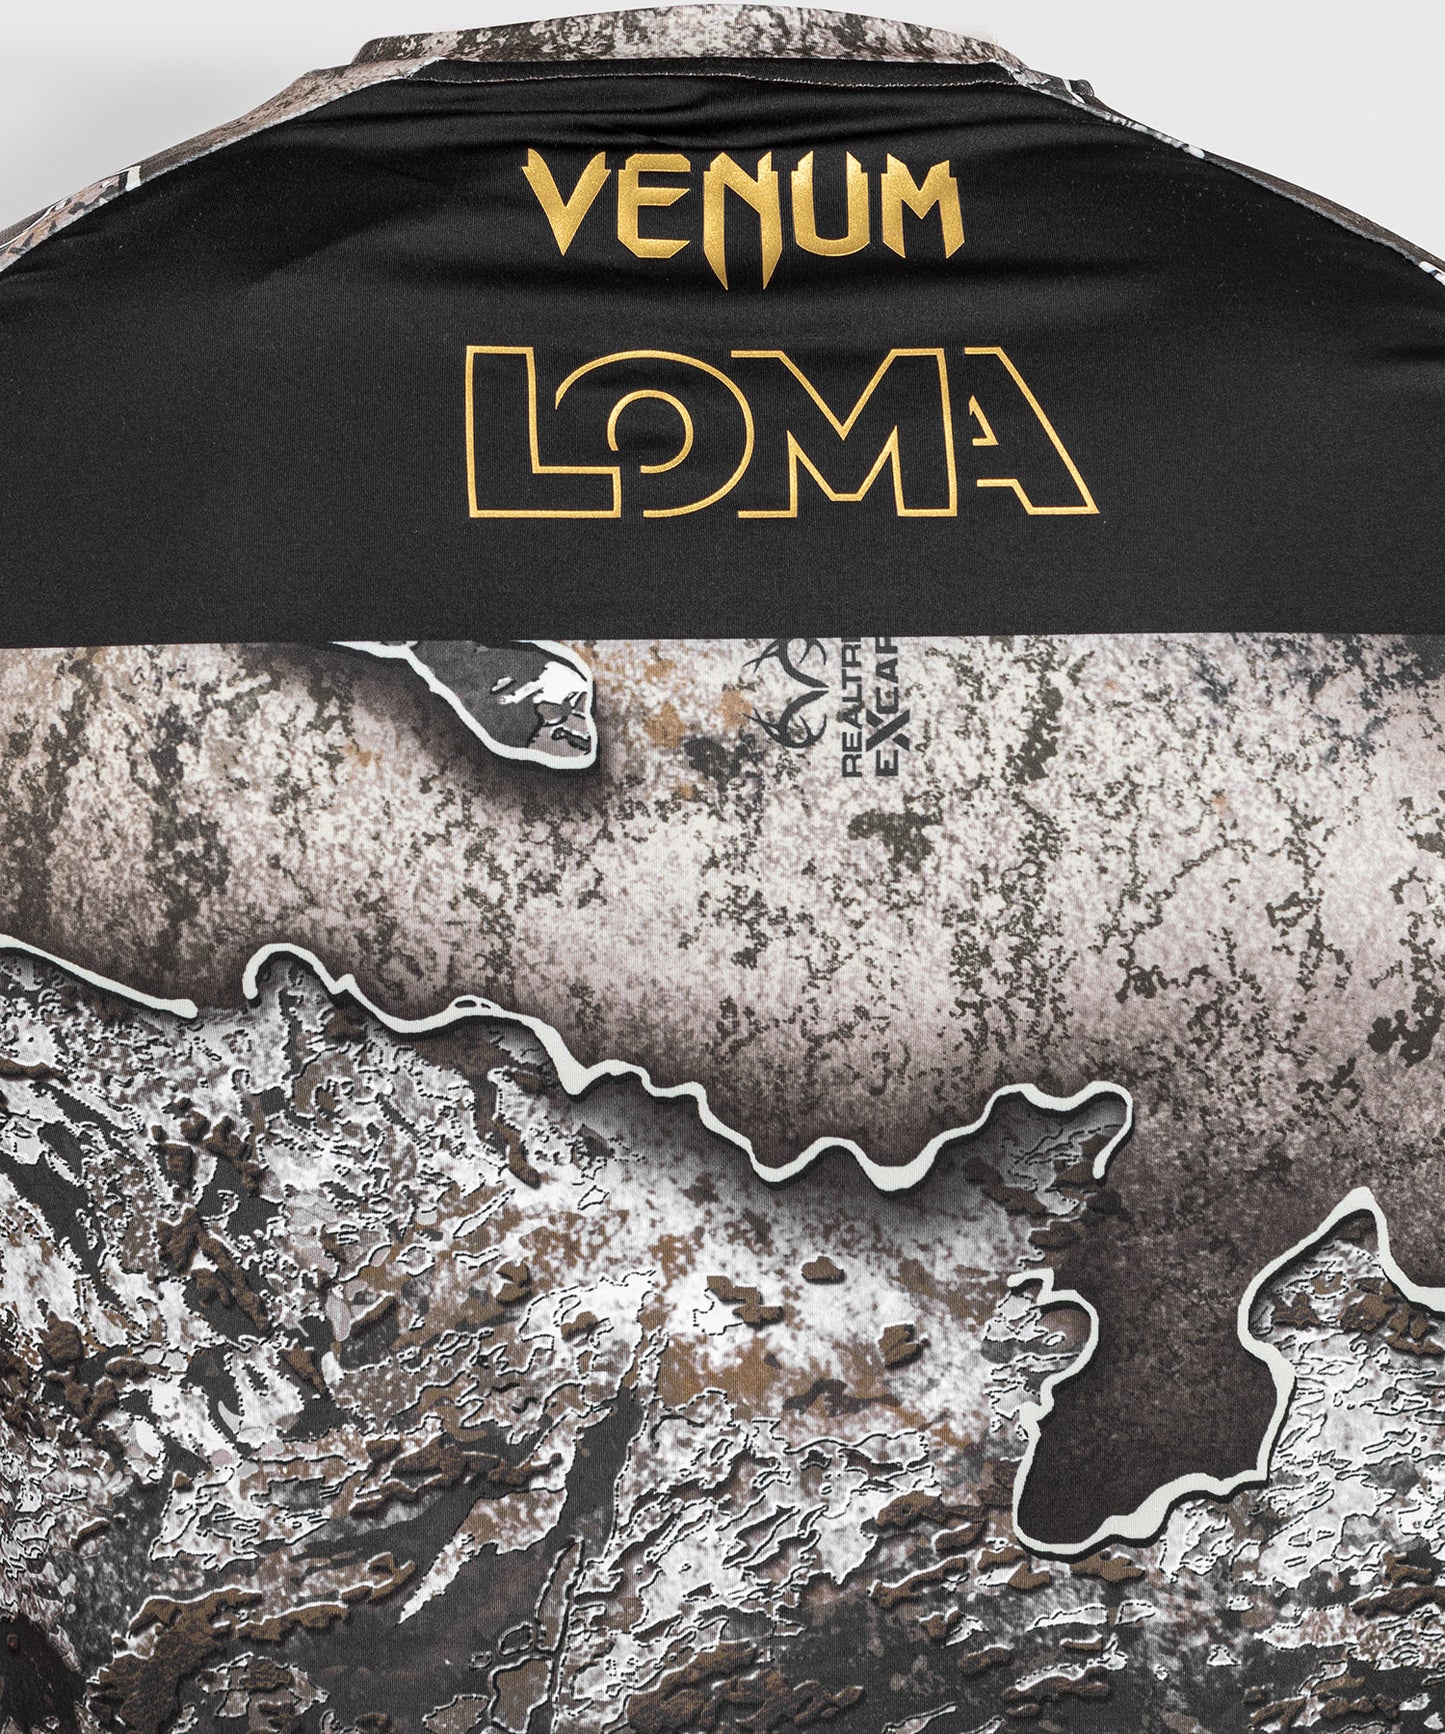 Venum x Realtree Loma Official Dry Tech T-shirt - October 2022